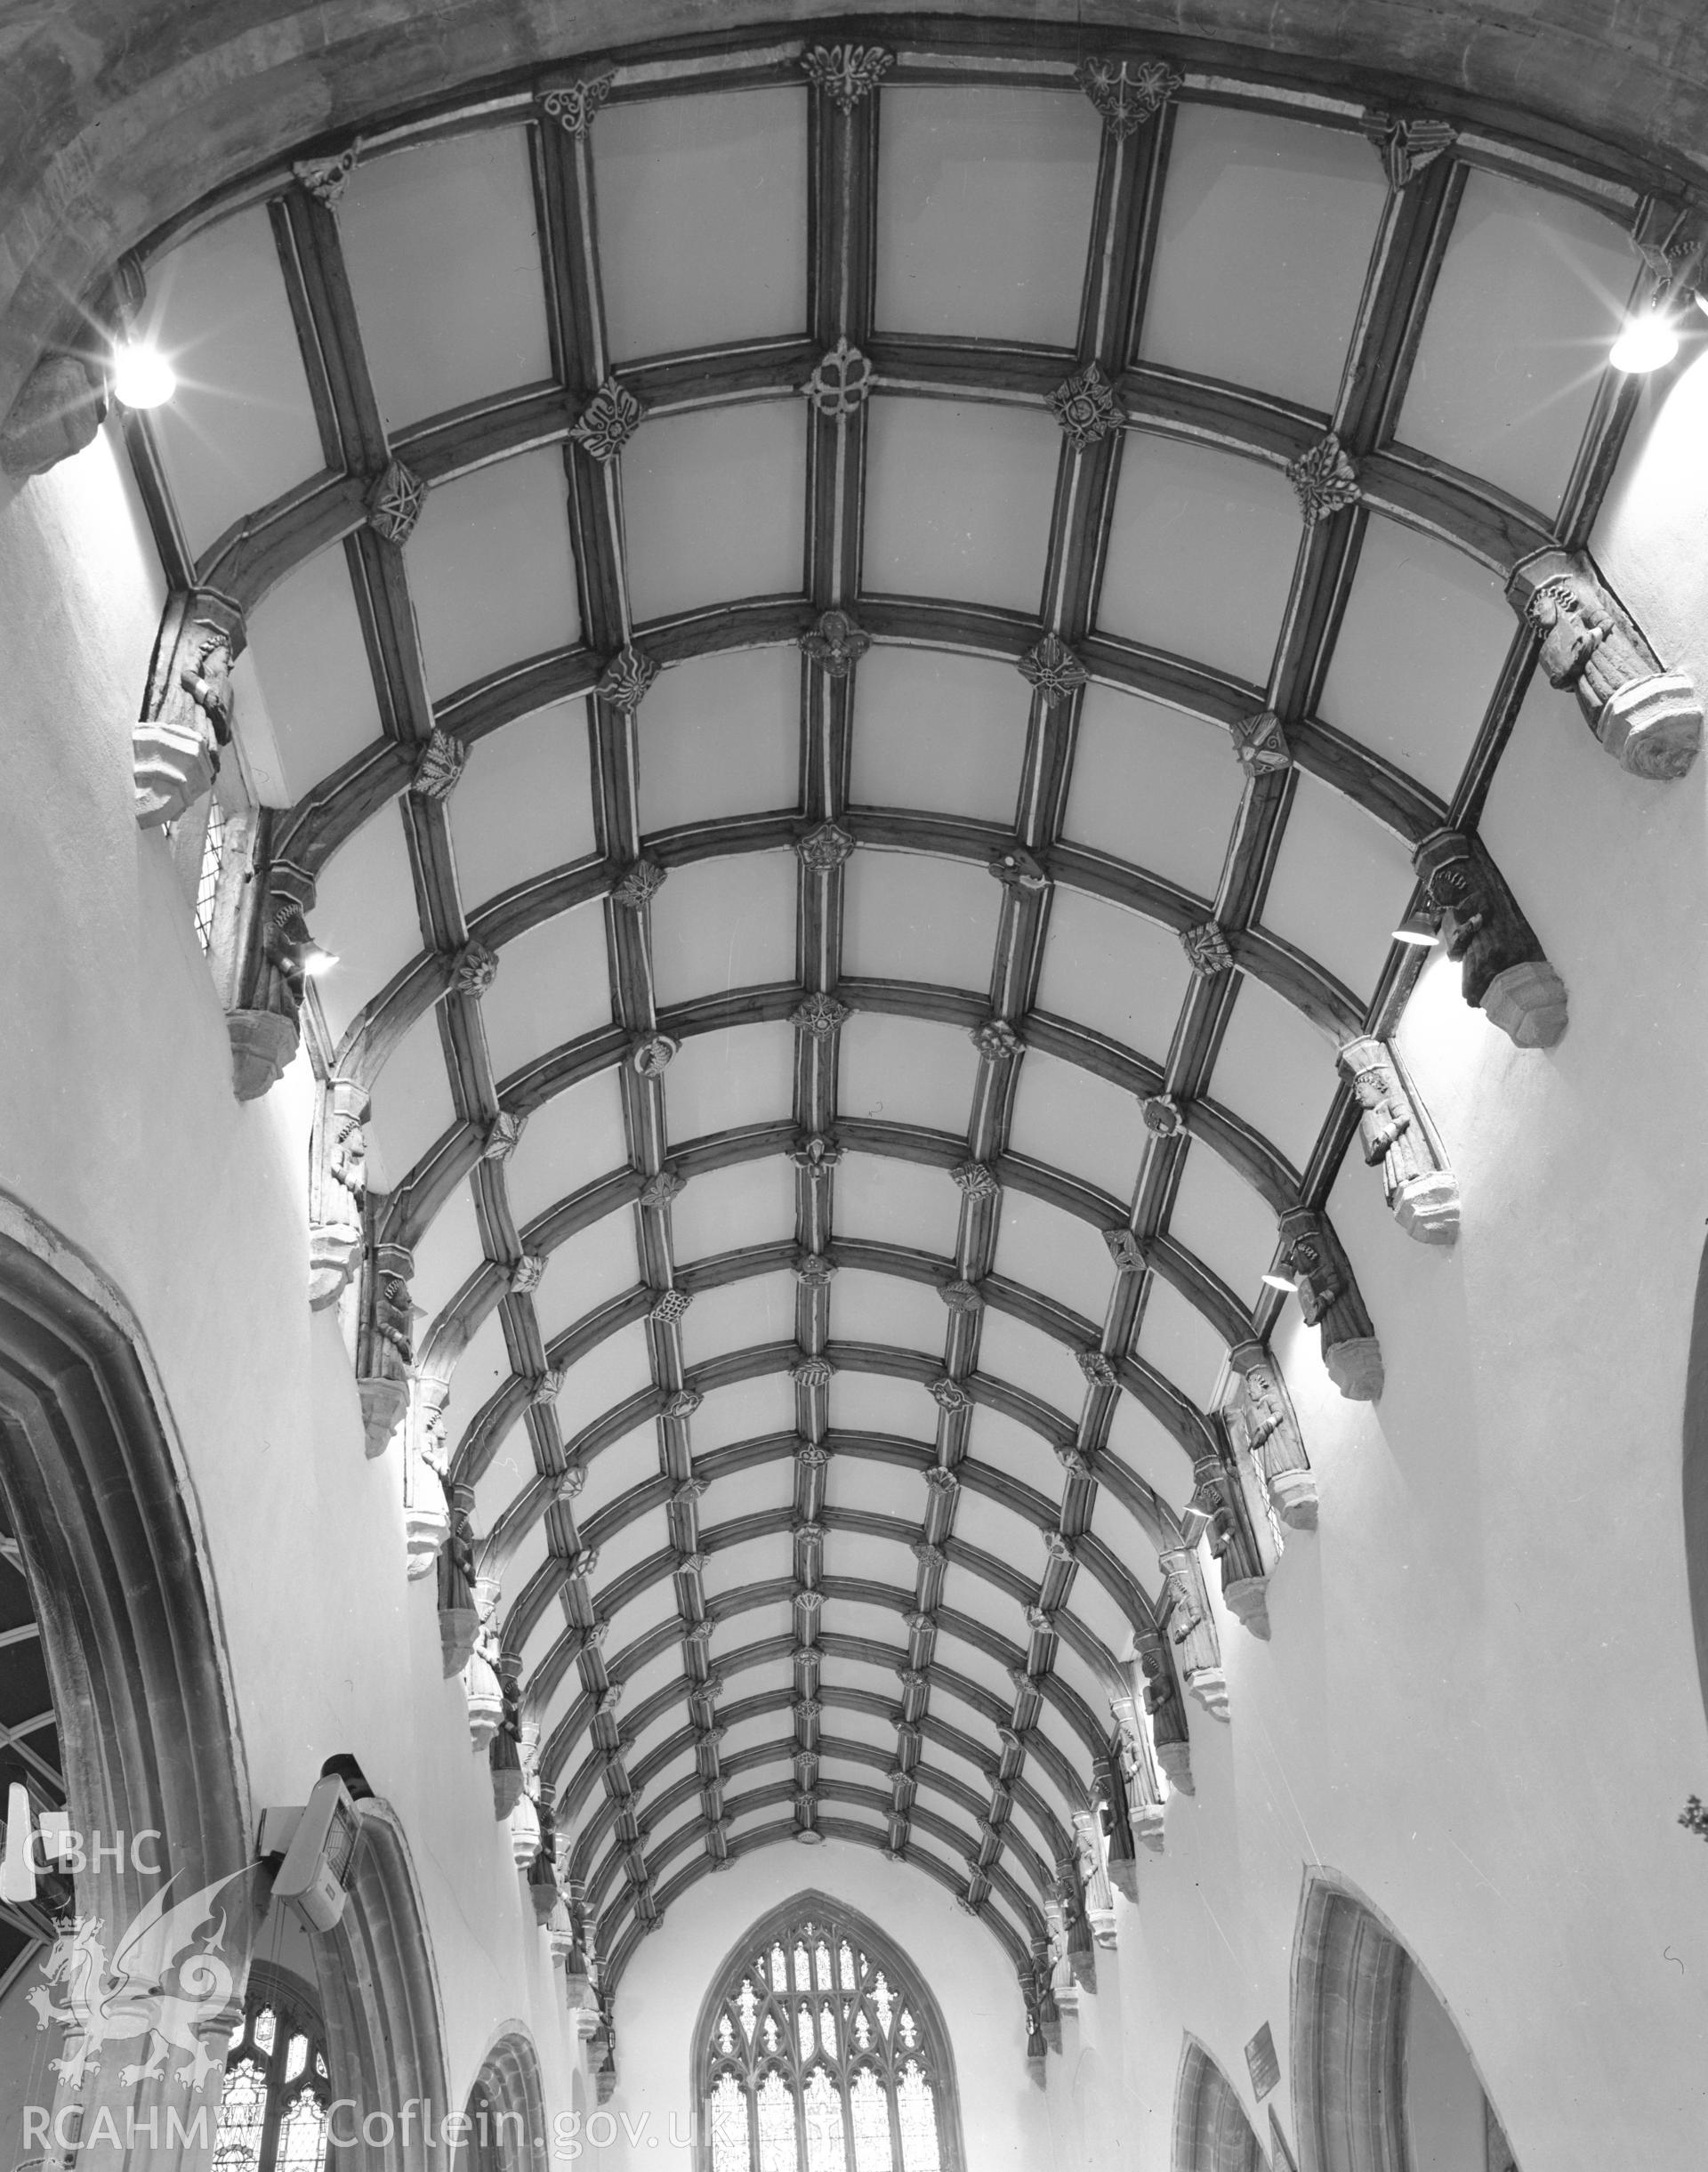 Black and white acetate negative showing interior view of Tenby Parish Church.